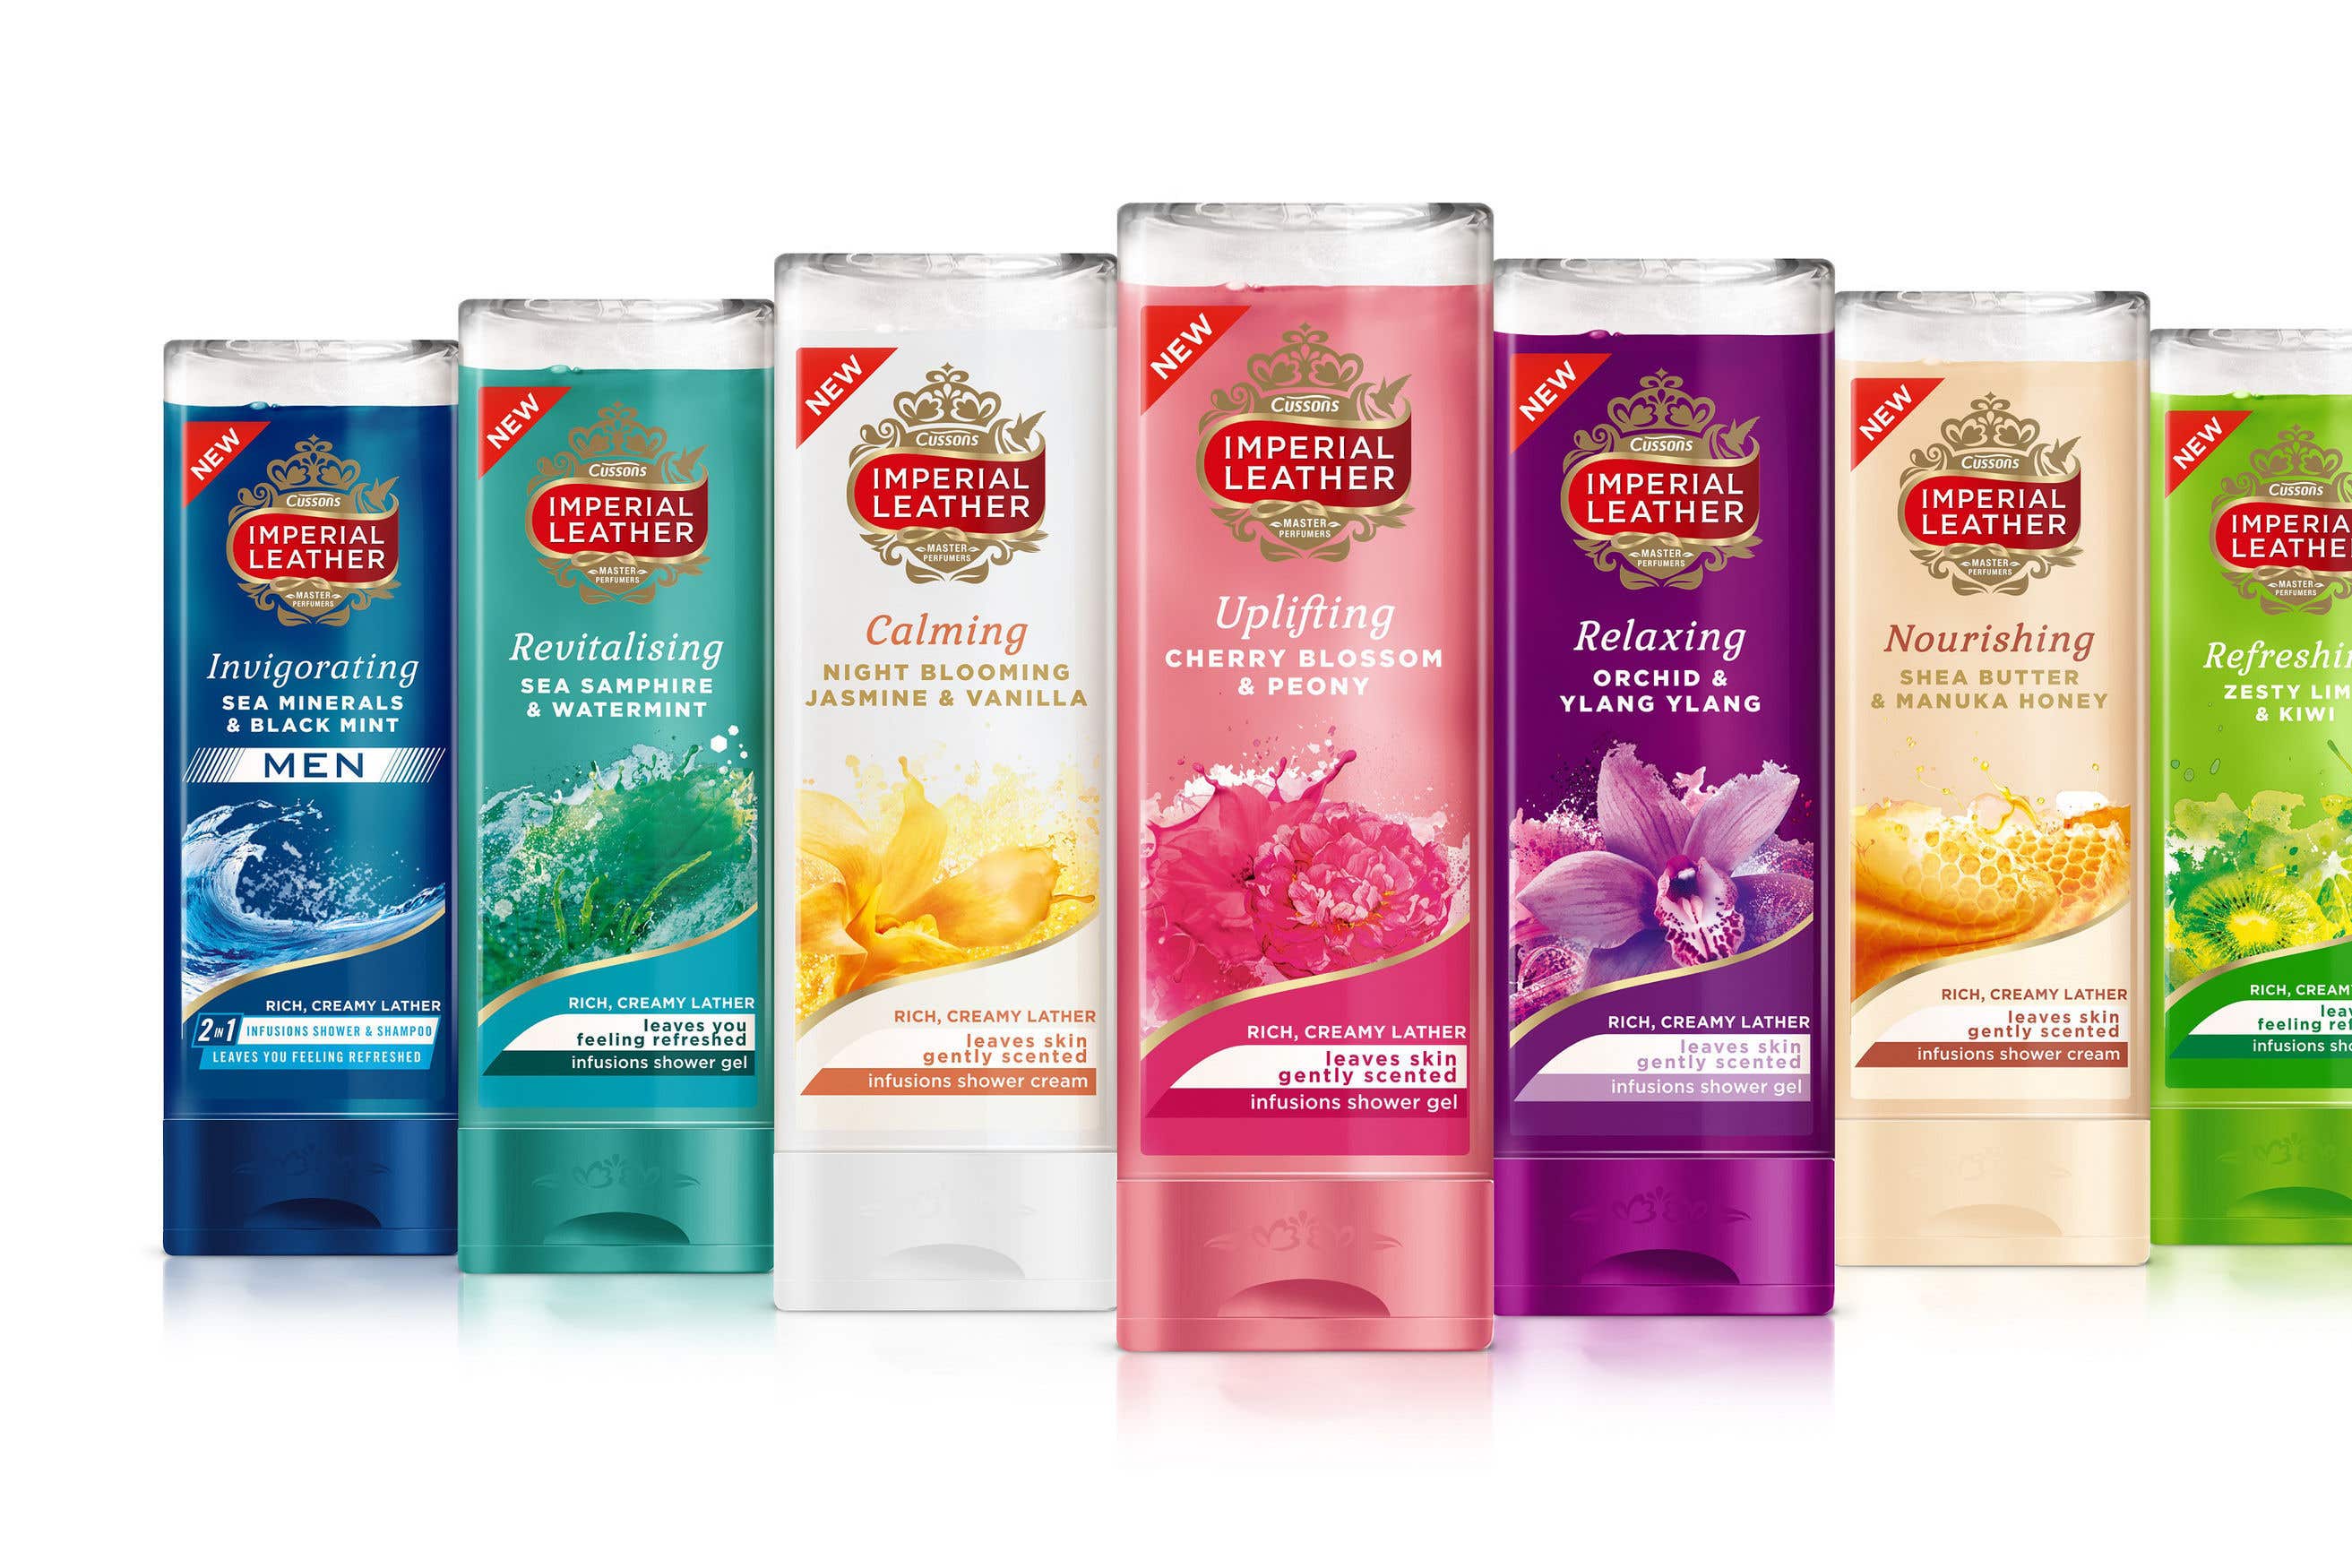 PZ Cussons’ first Imperial Leather television campaign in seven years has helped reinvigorate declining sales of the soap brand as the group’s half-year profits leapt higher despite cost pressures (PZ Cussons/PA)